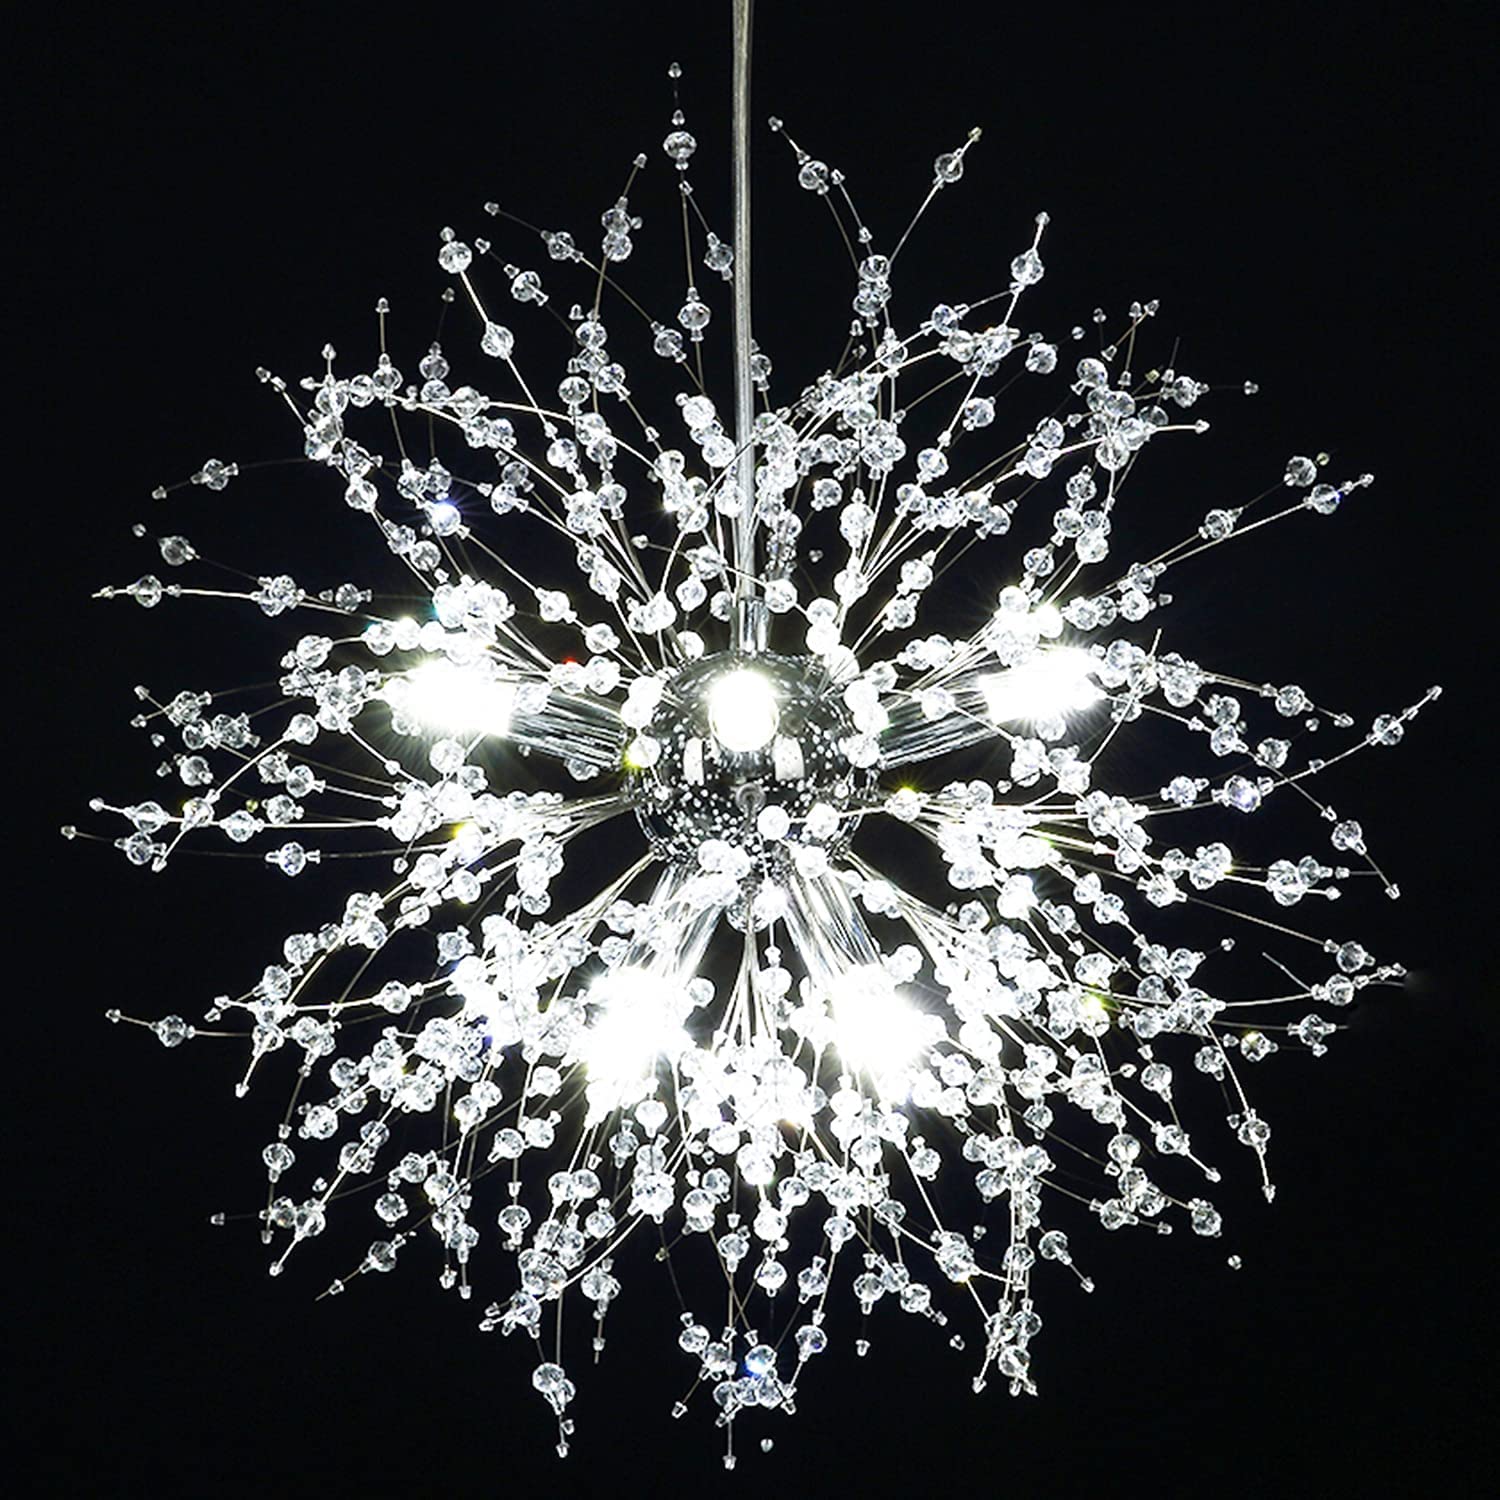 Are Crystal Chandeliers Out Of Style?